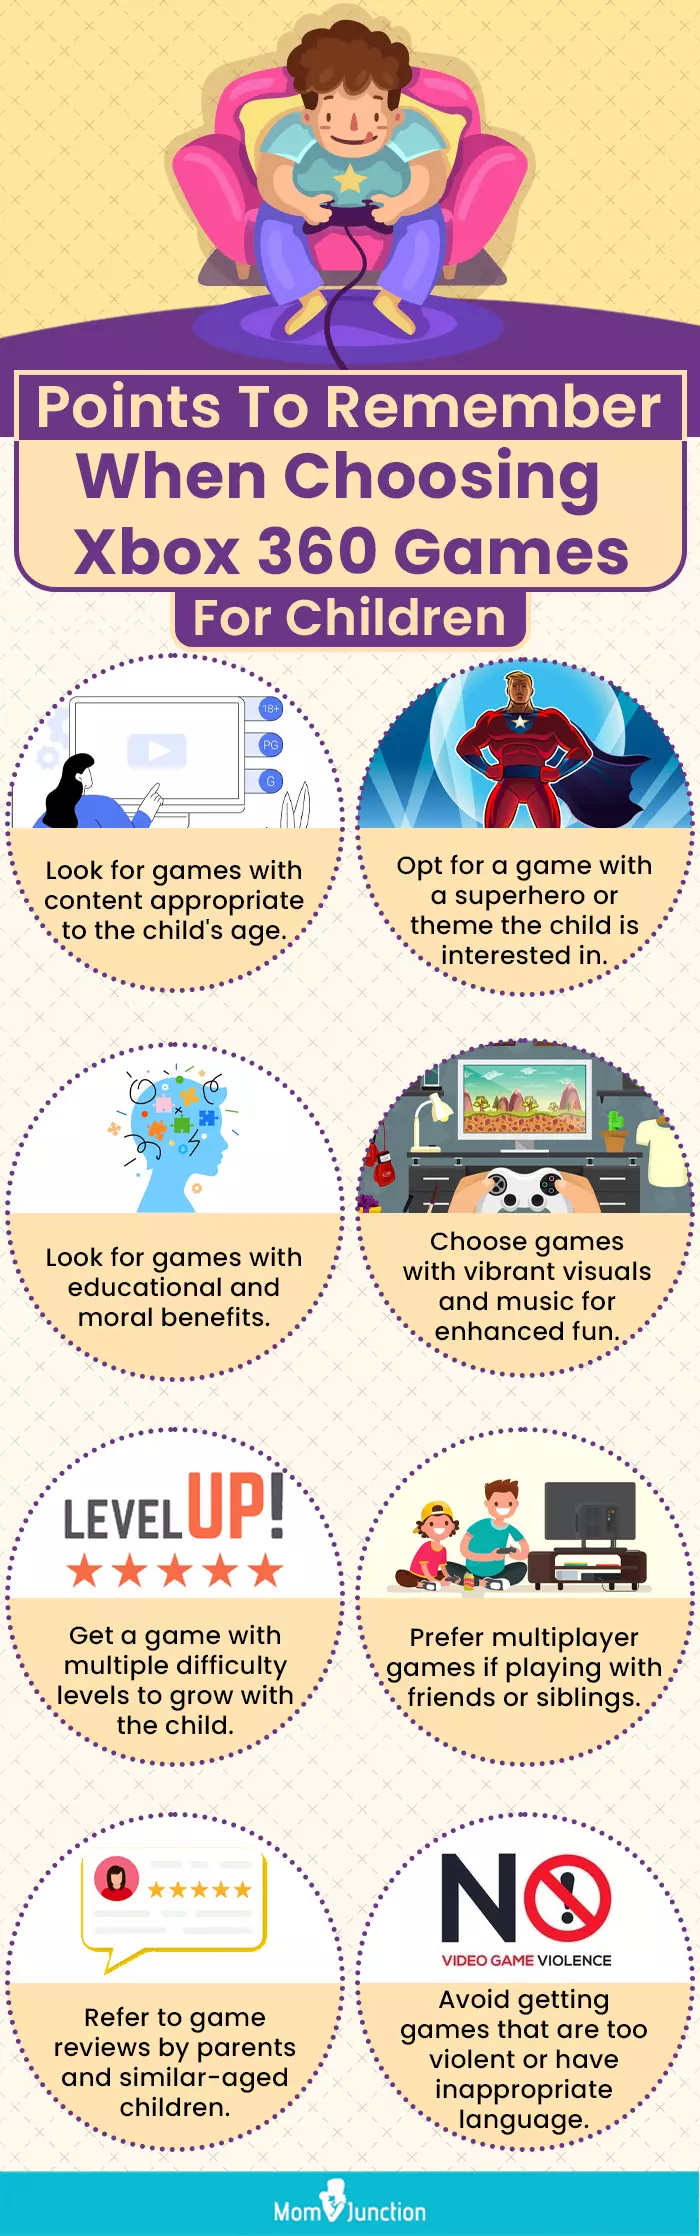 Points To Remember When Choosing A Xbox 360 Games For Children (infographic)